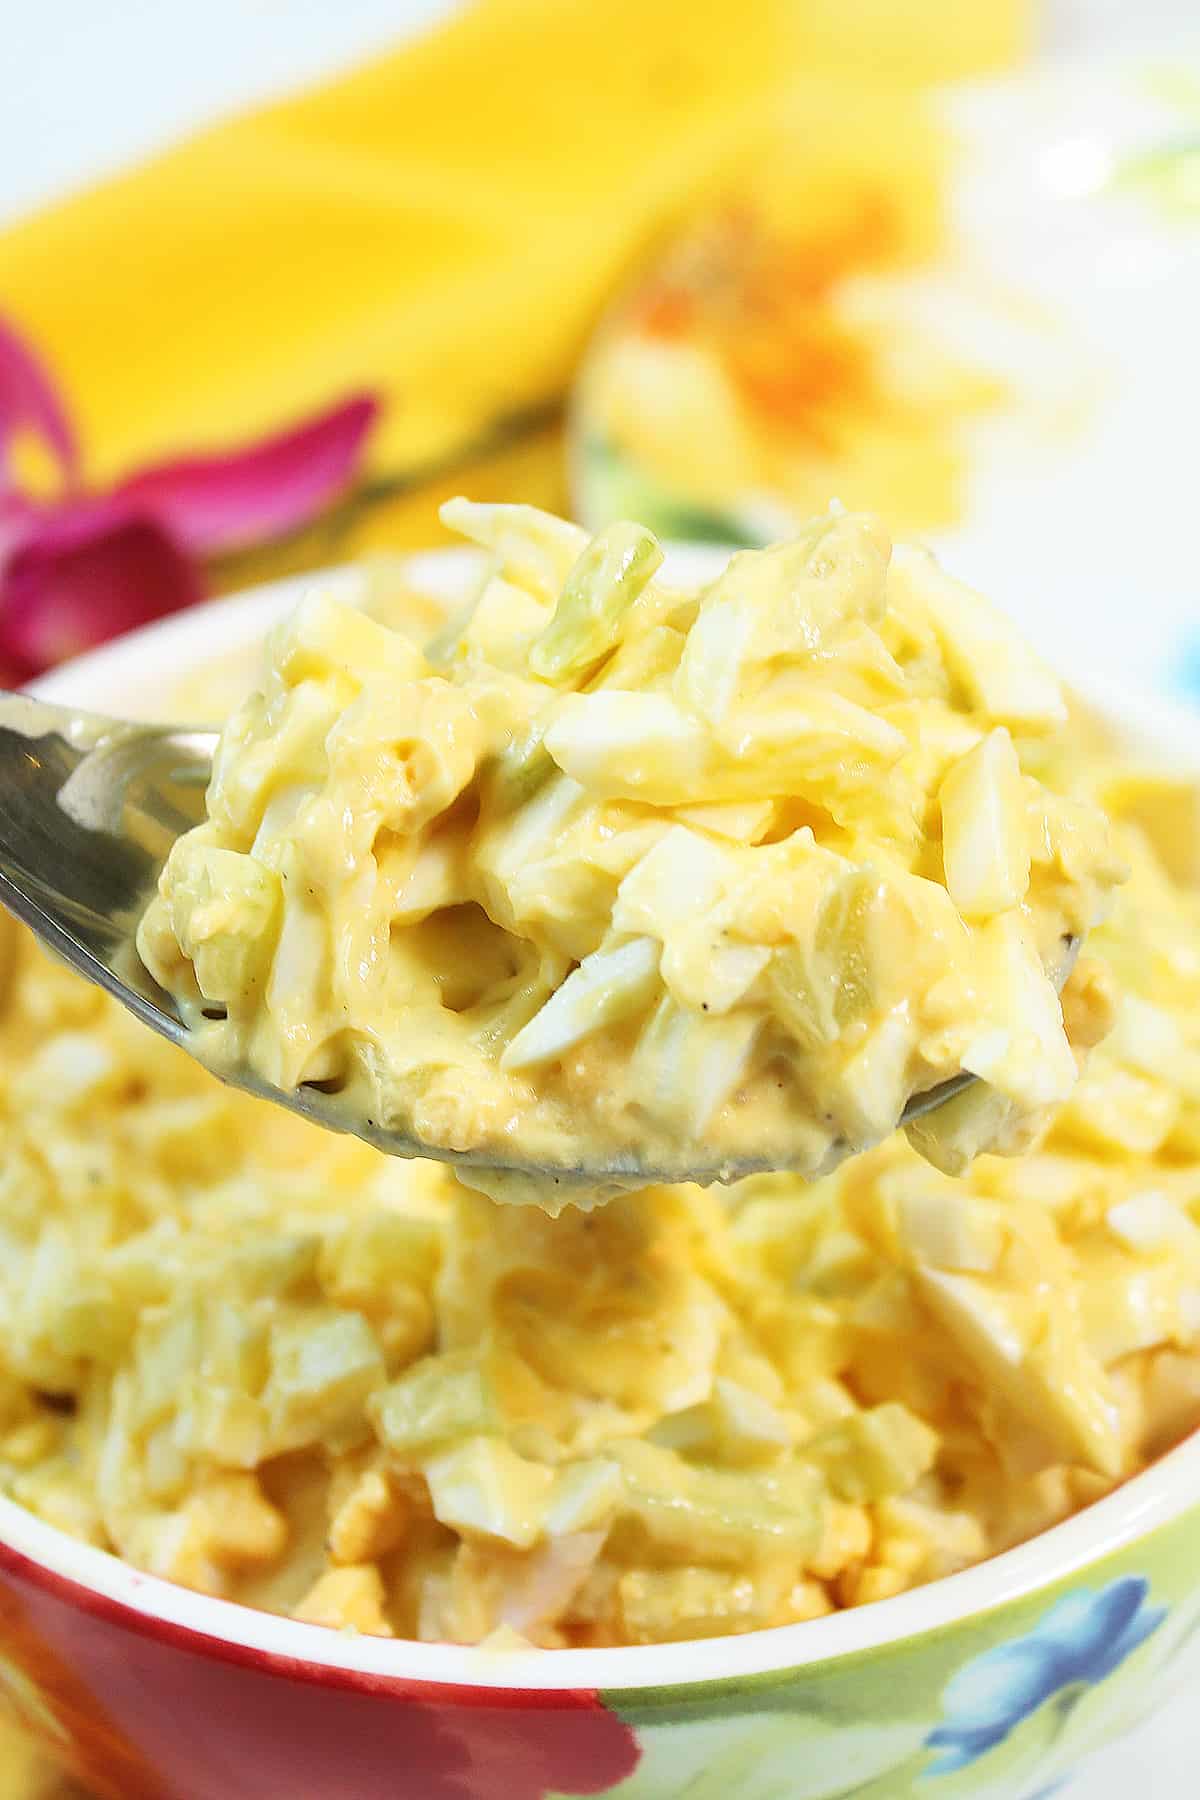 Spoonful of easy egg salad over bowl.